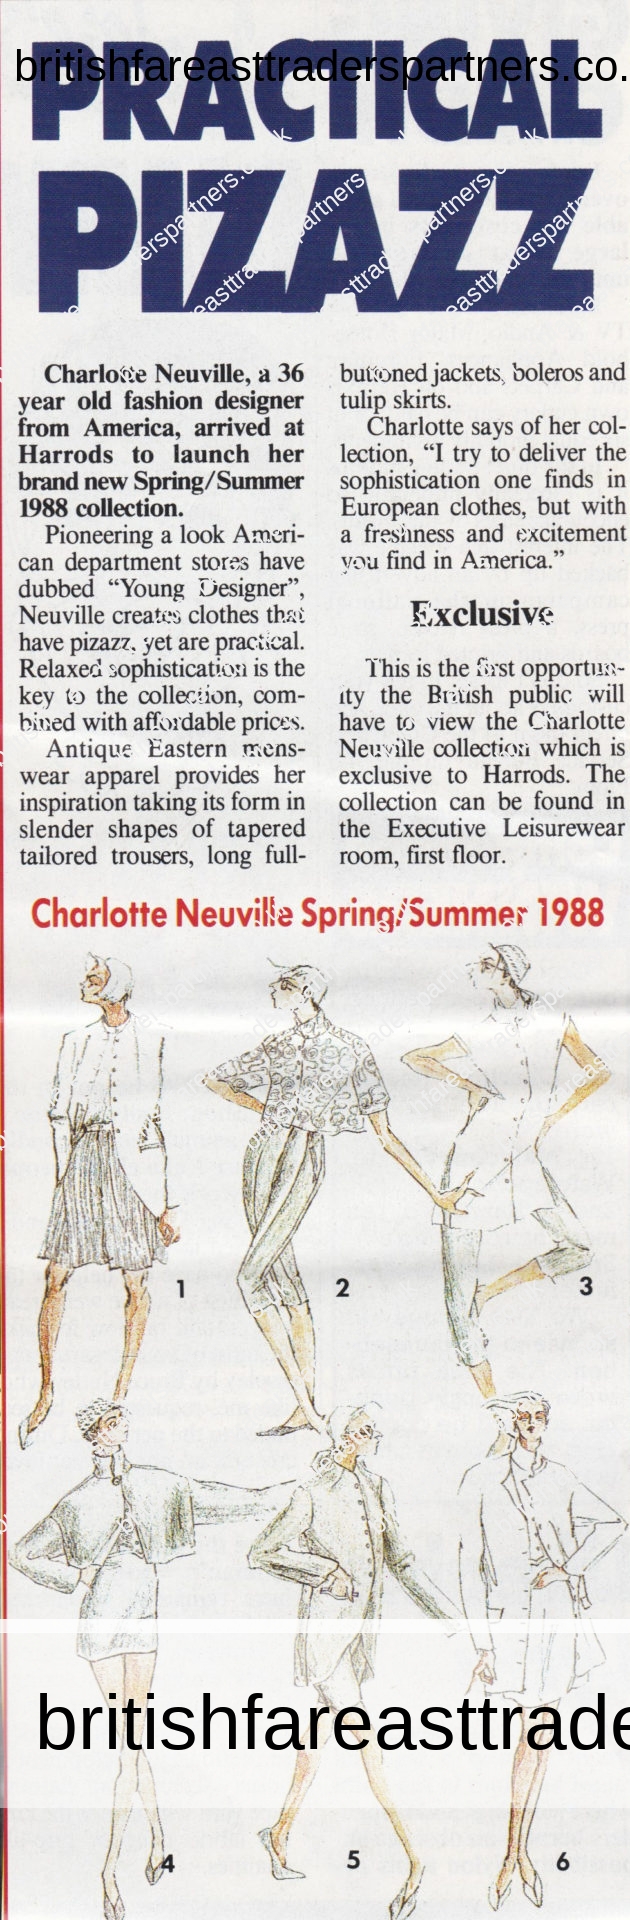 VINTAGE APRIL 1988 “CHARLOTTE NEUVILLE SPRING/SUMMER 1988” COLLECTABLE ARTICLE PRINT AD COLLECTABLES | ADVERTISING | FASHION | BRITISH | AMERICAN | LIFESTYLE | SHOPPING | DESIGNER